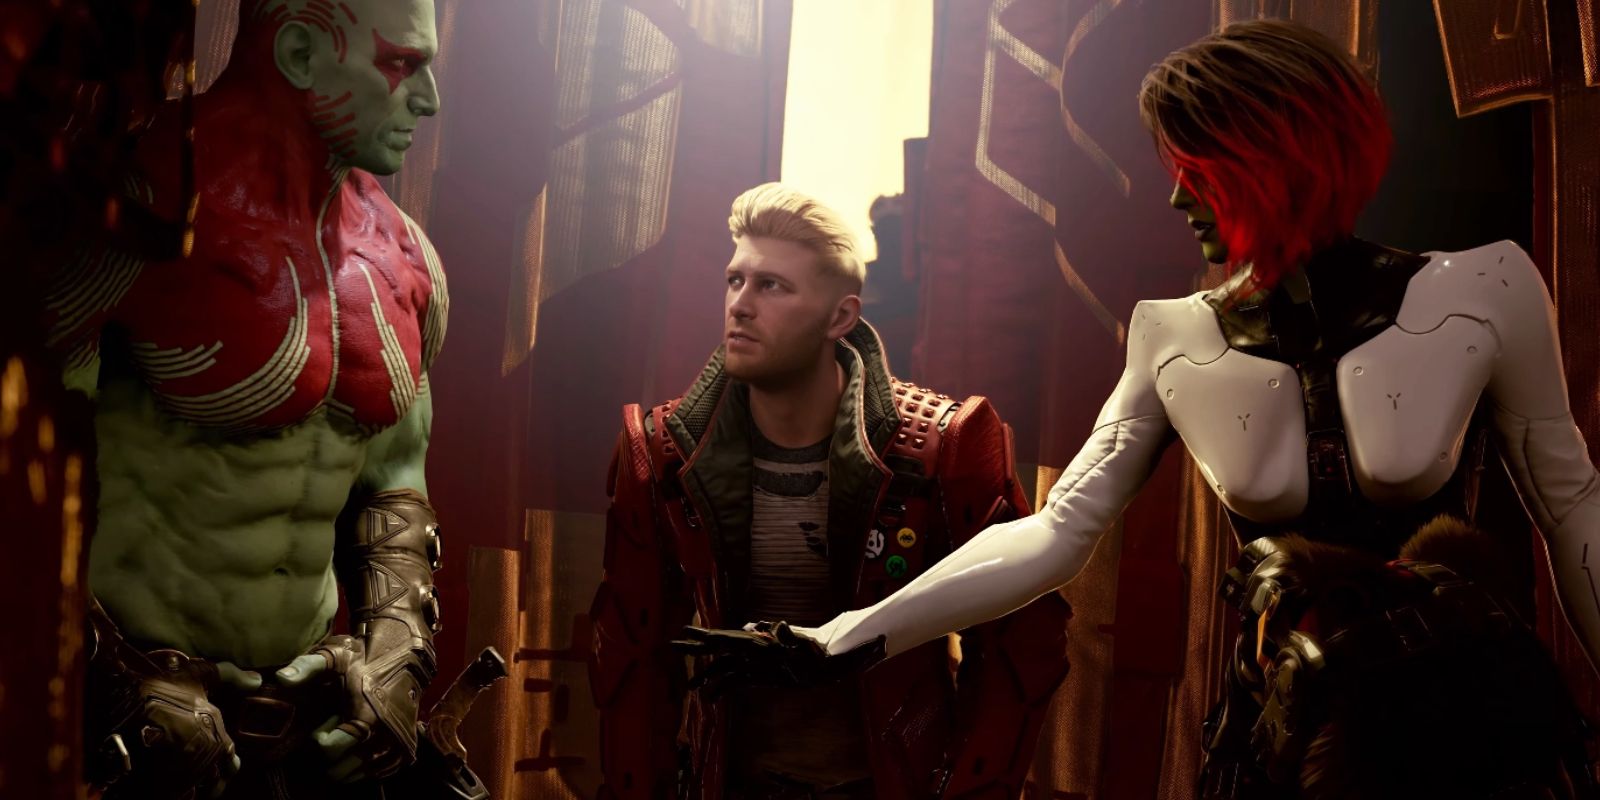 How The Guardians Of The Galaxy Game Characters Differ From The Films Star Lord Gamora Drax Rocket Groot